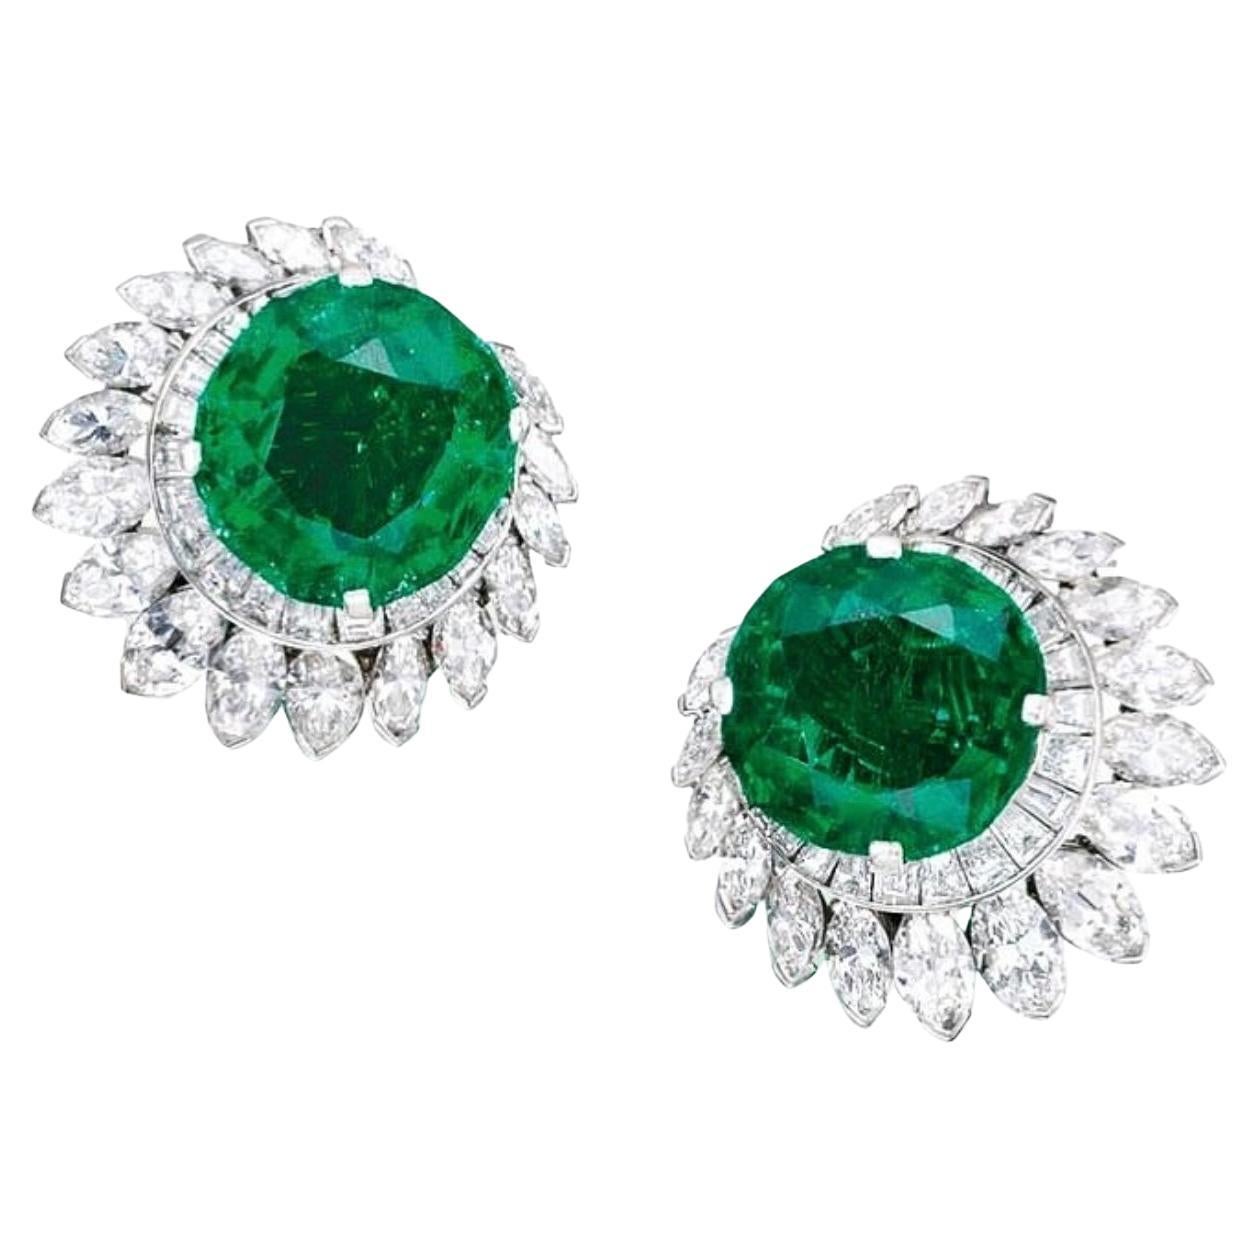 Harry Winston Emerald and Diamond Ear Clips in Platinum. For Sale